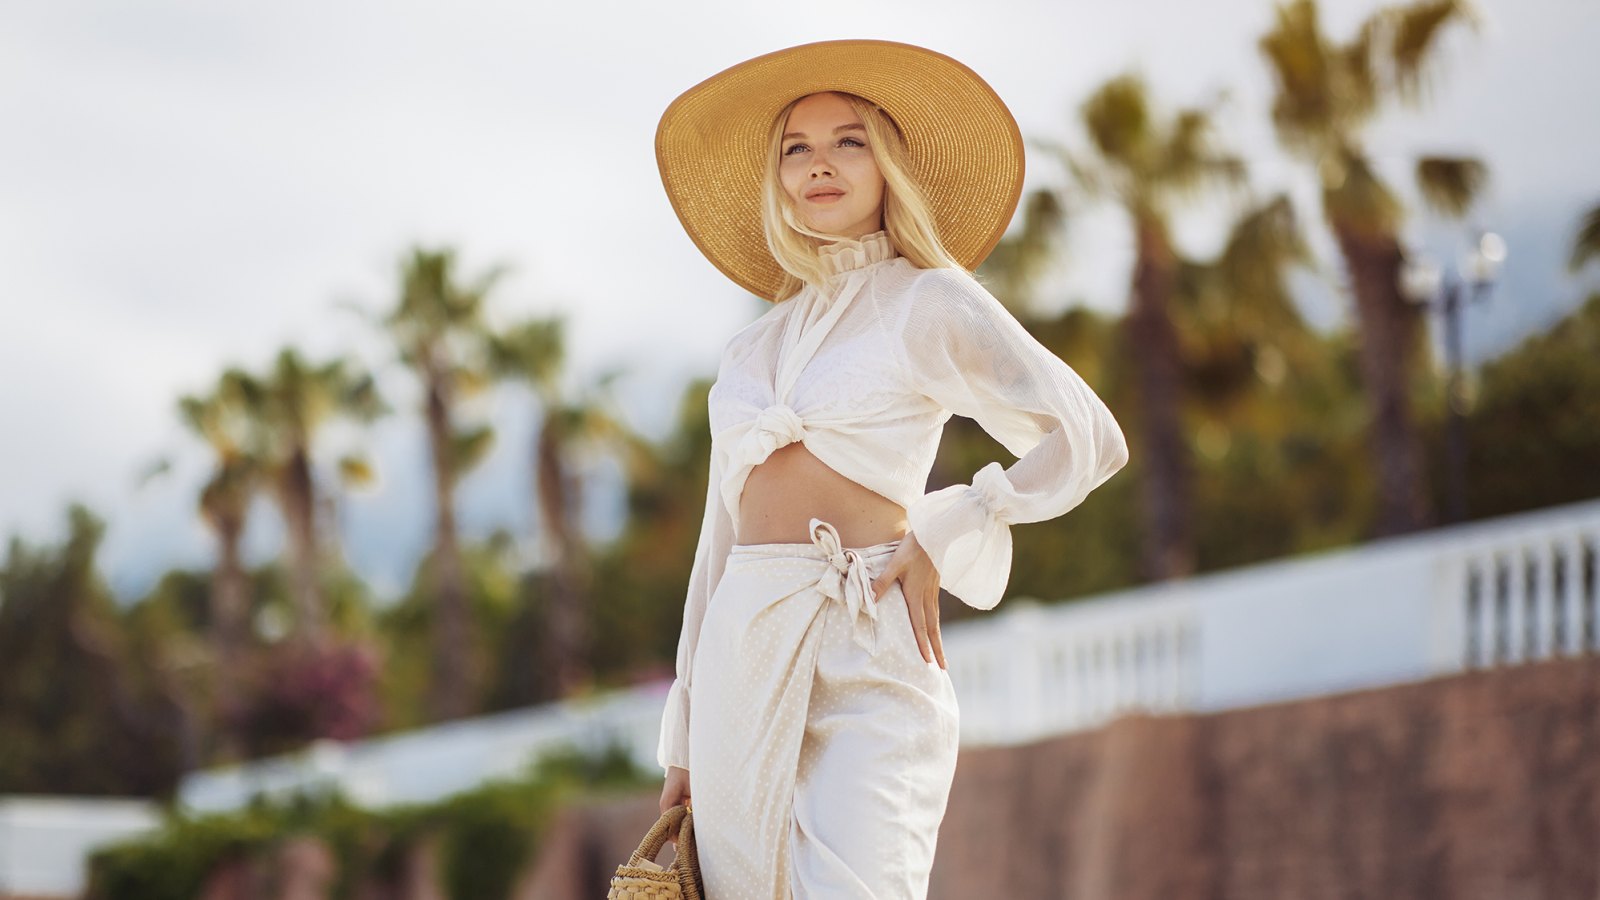 Stunning blonde woman in summer beach outfit relaxing outdoors against sea resort and palm trees on the background. A fashionable romantic young adult lady wearing a trendy vintage straw hat, white blouse, and skirt, standing at the sea coast